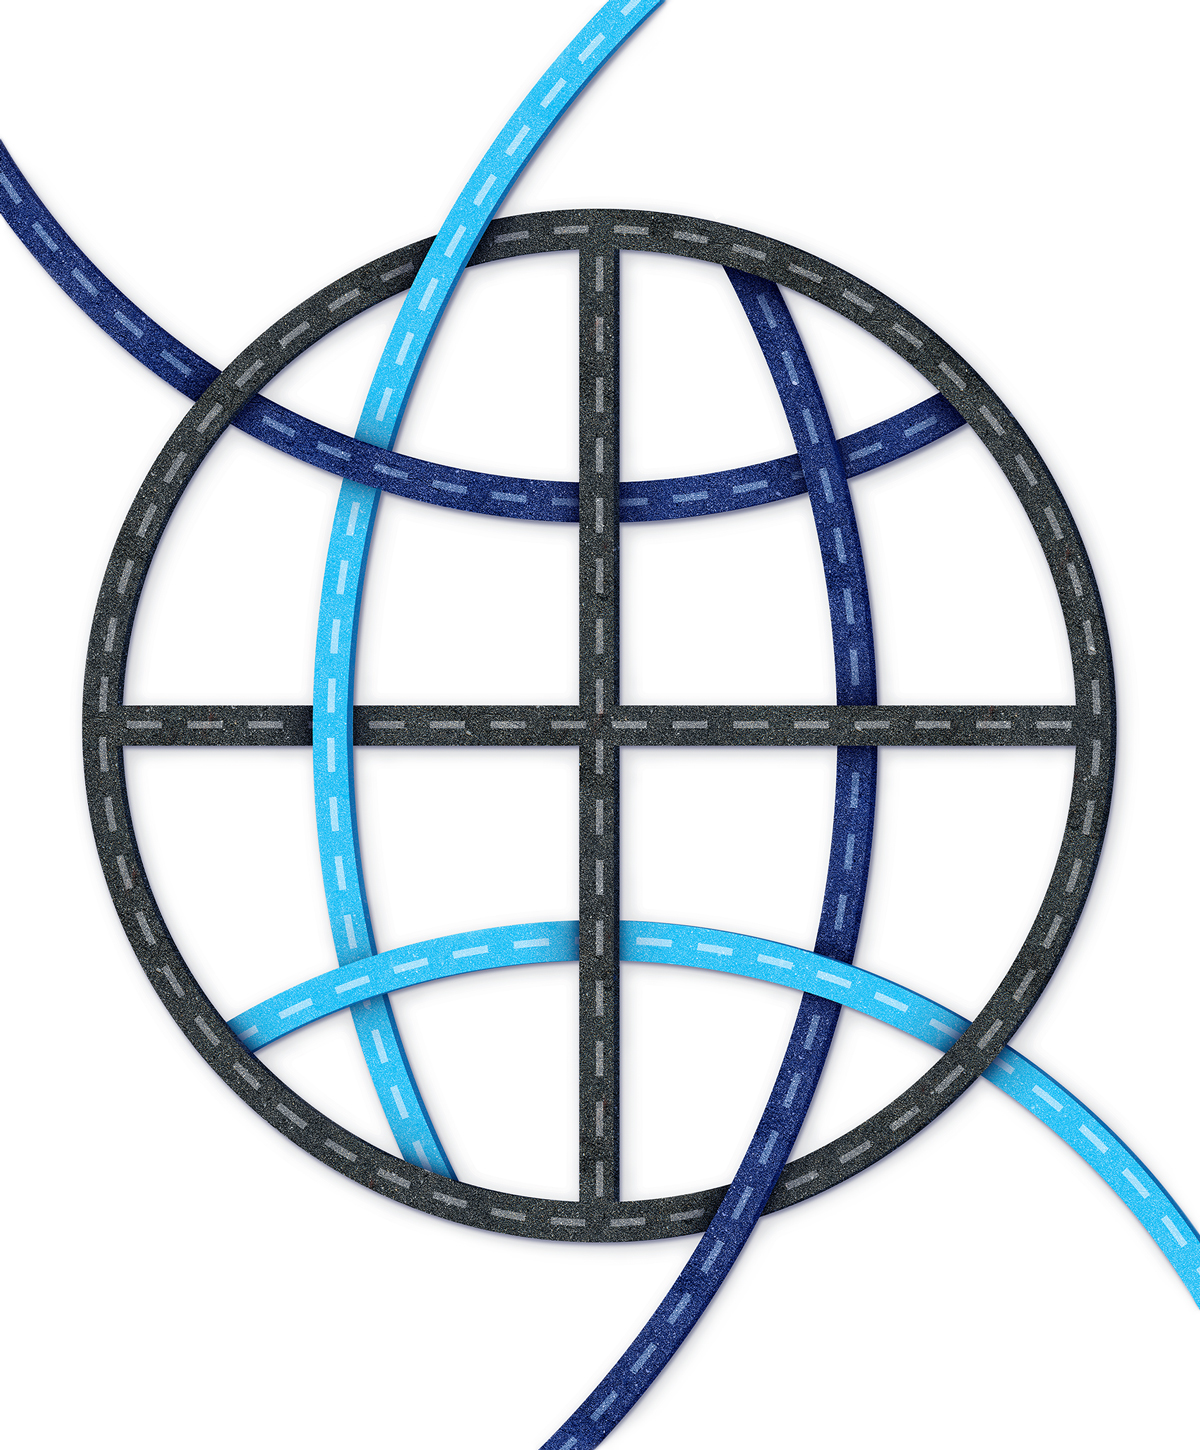 An illustration by Mariaelena Caputi which represents the icon of the world, whose lines become roads branching off in different directions. The image symbolizes the uncertainty of the current global economic regime and the importance of not being unprepared for the potential transformations that it may soon undergo.